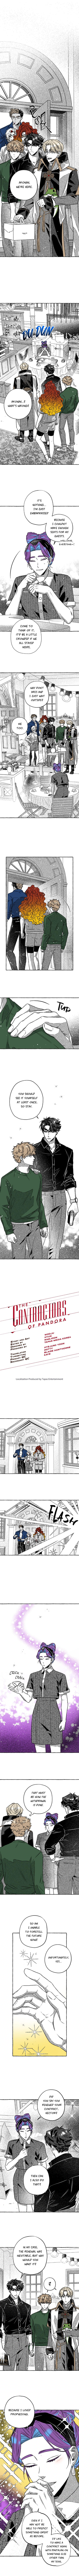 The Contractors Of Pandora - Page 2